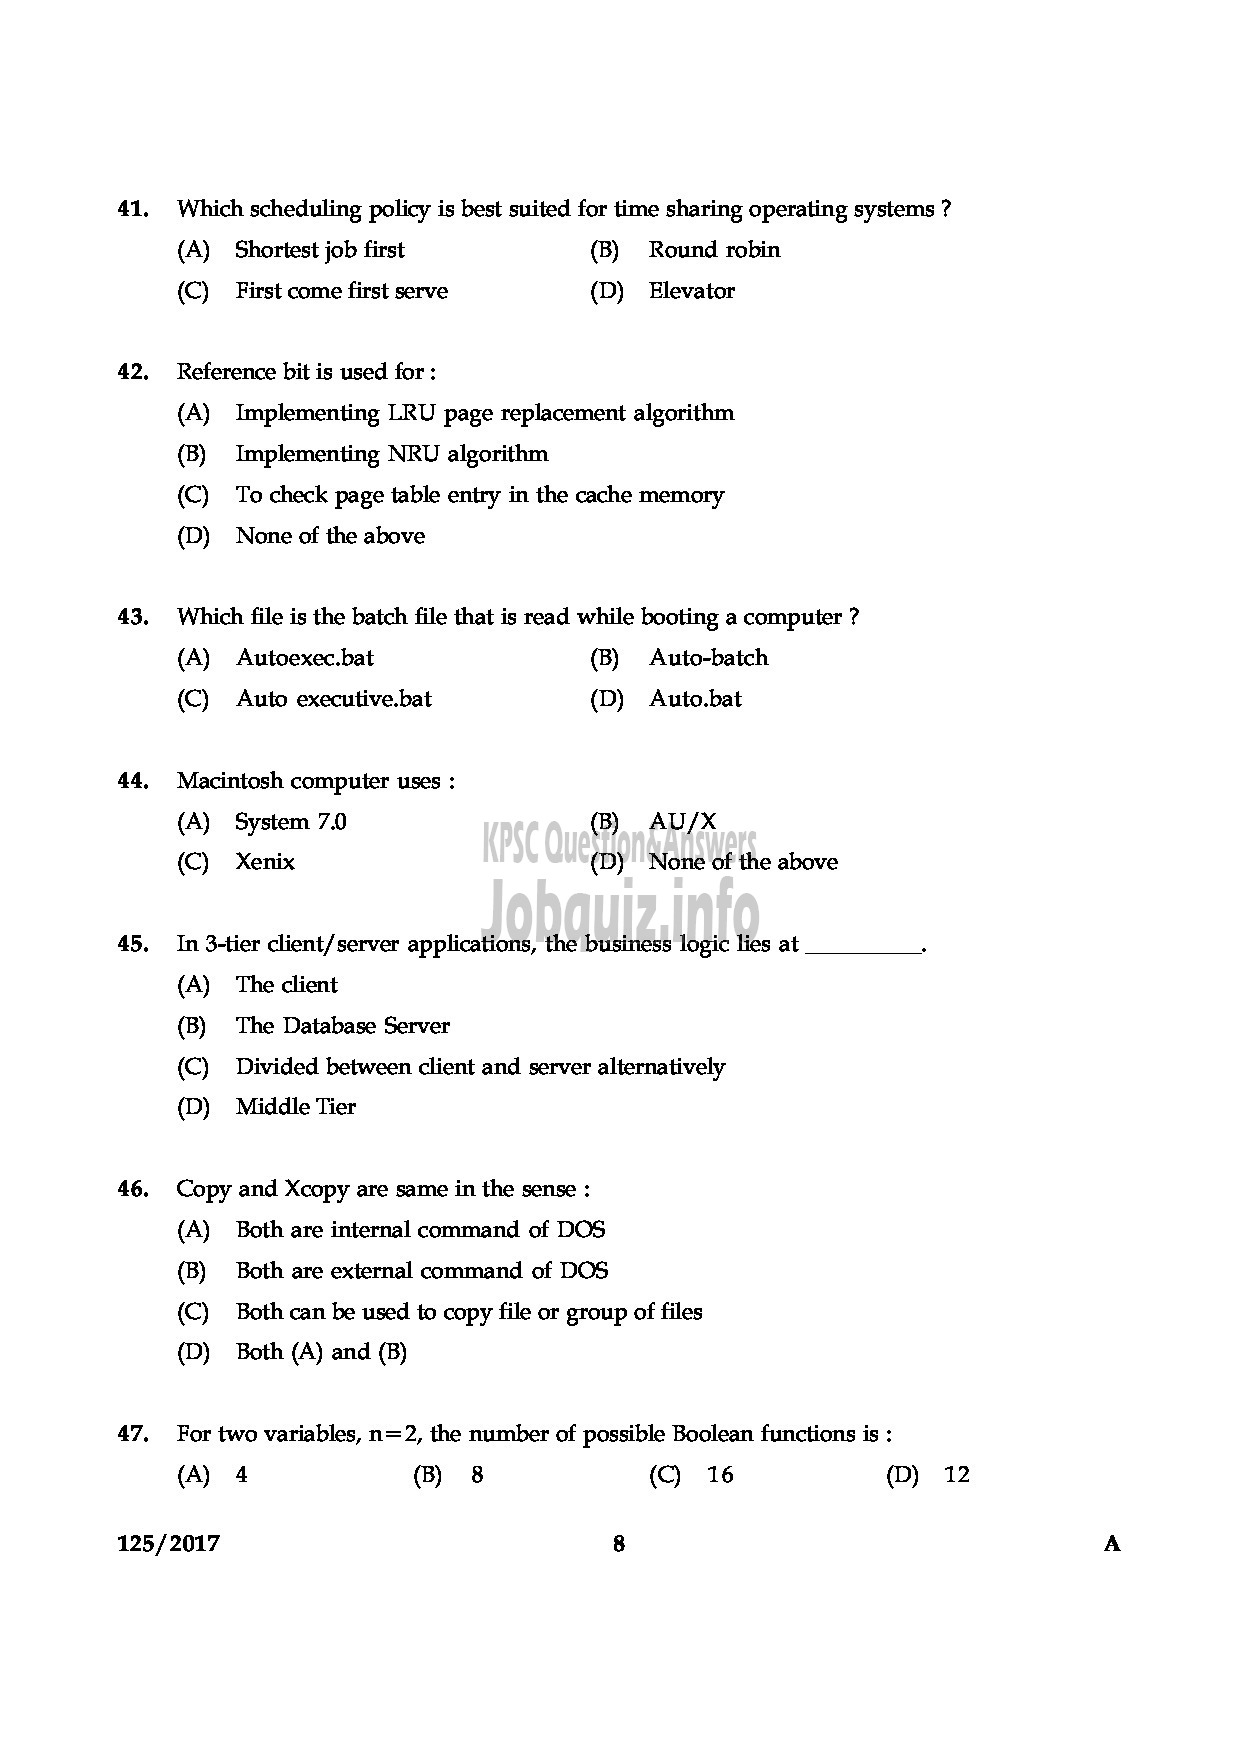 Kerala PSC Question Paper - LECTURER IN COMPUTER APPLICATION COLLEGIATE EDUCATION-8